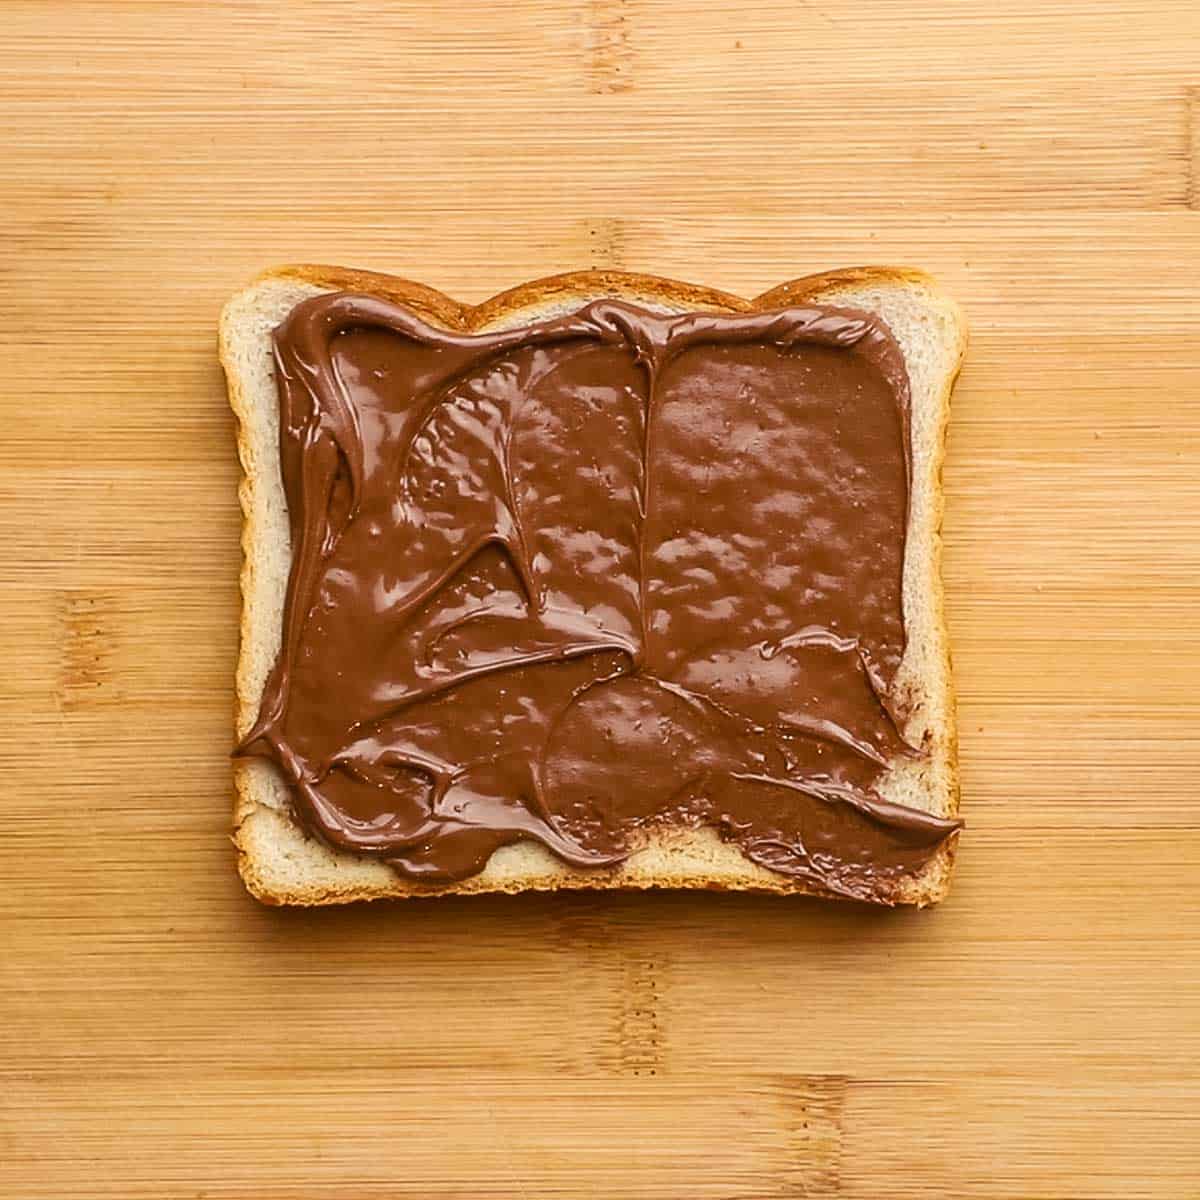 nutella spread on a slice of bread placed on a cutting board